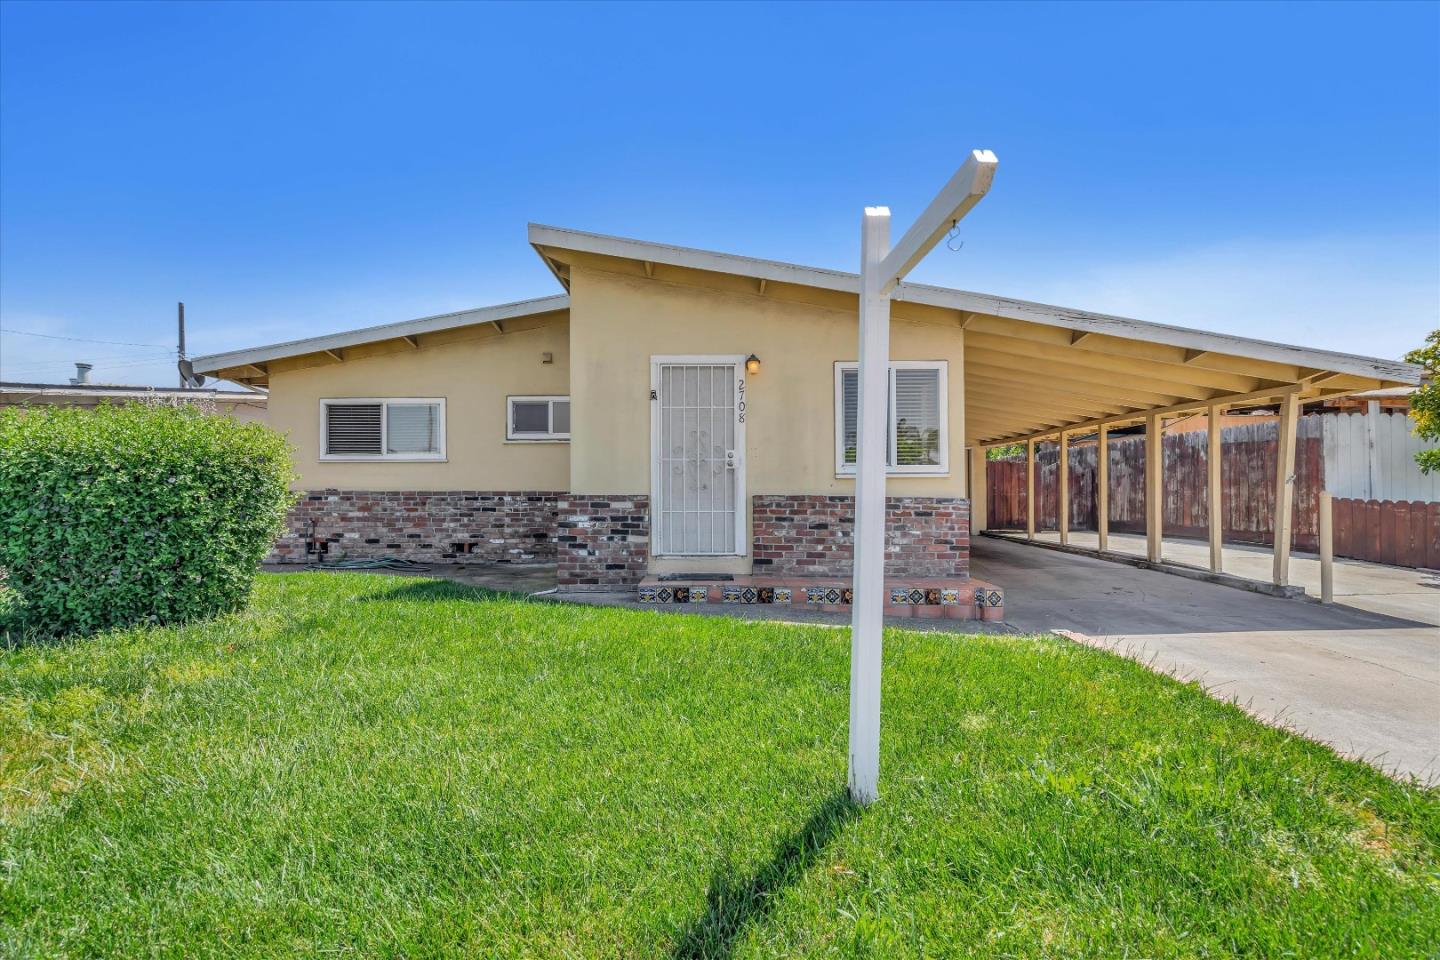 Photo of 2708 Coventry Dr in San Jose, CA